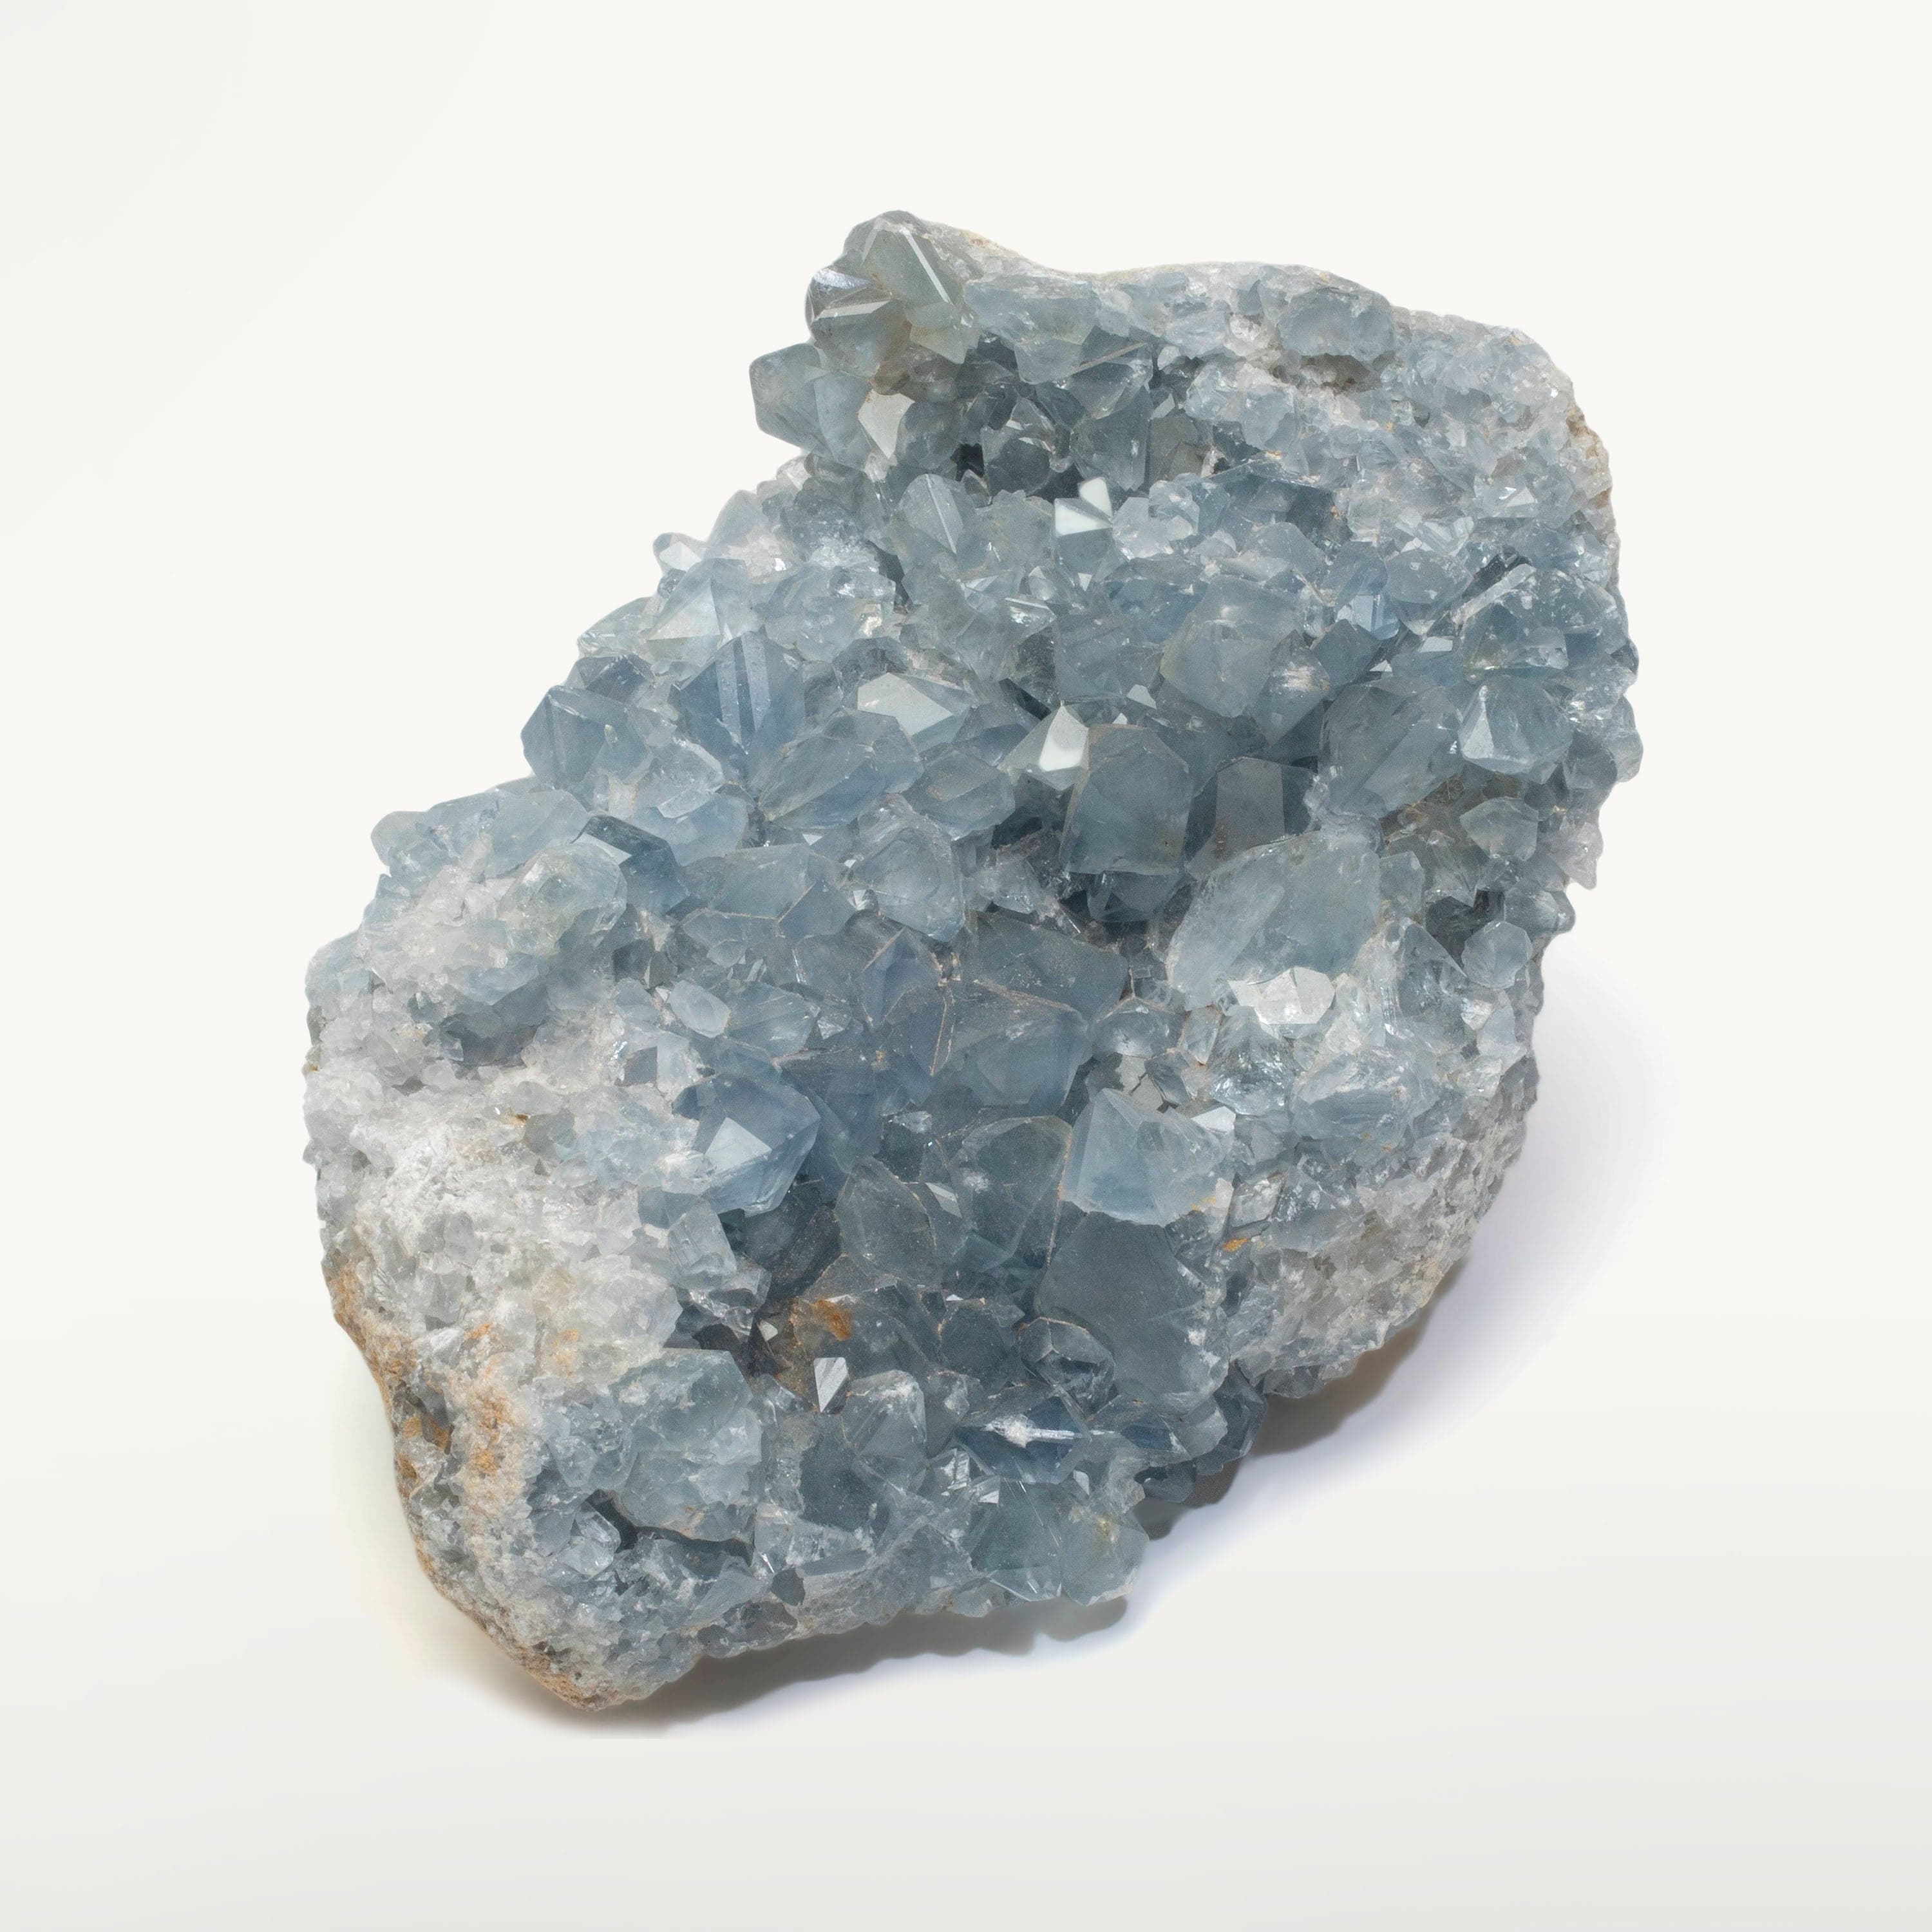 Kalifano Celestite Natural Celestite Crystal Cluster Geode from Madagascar - 8 in. CG1400.004